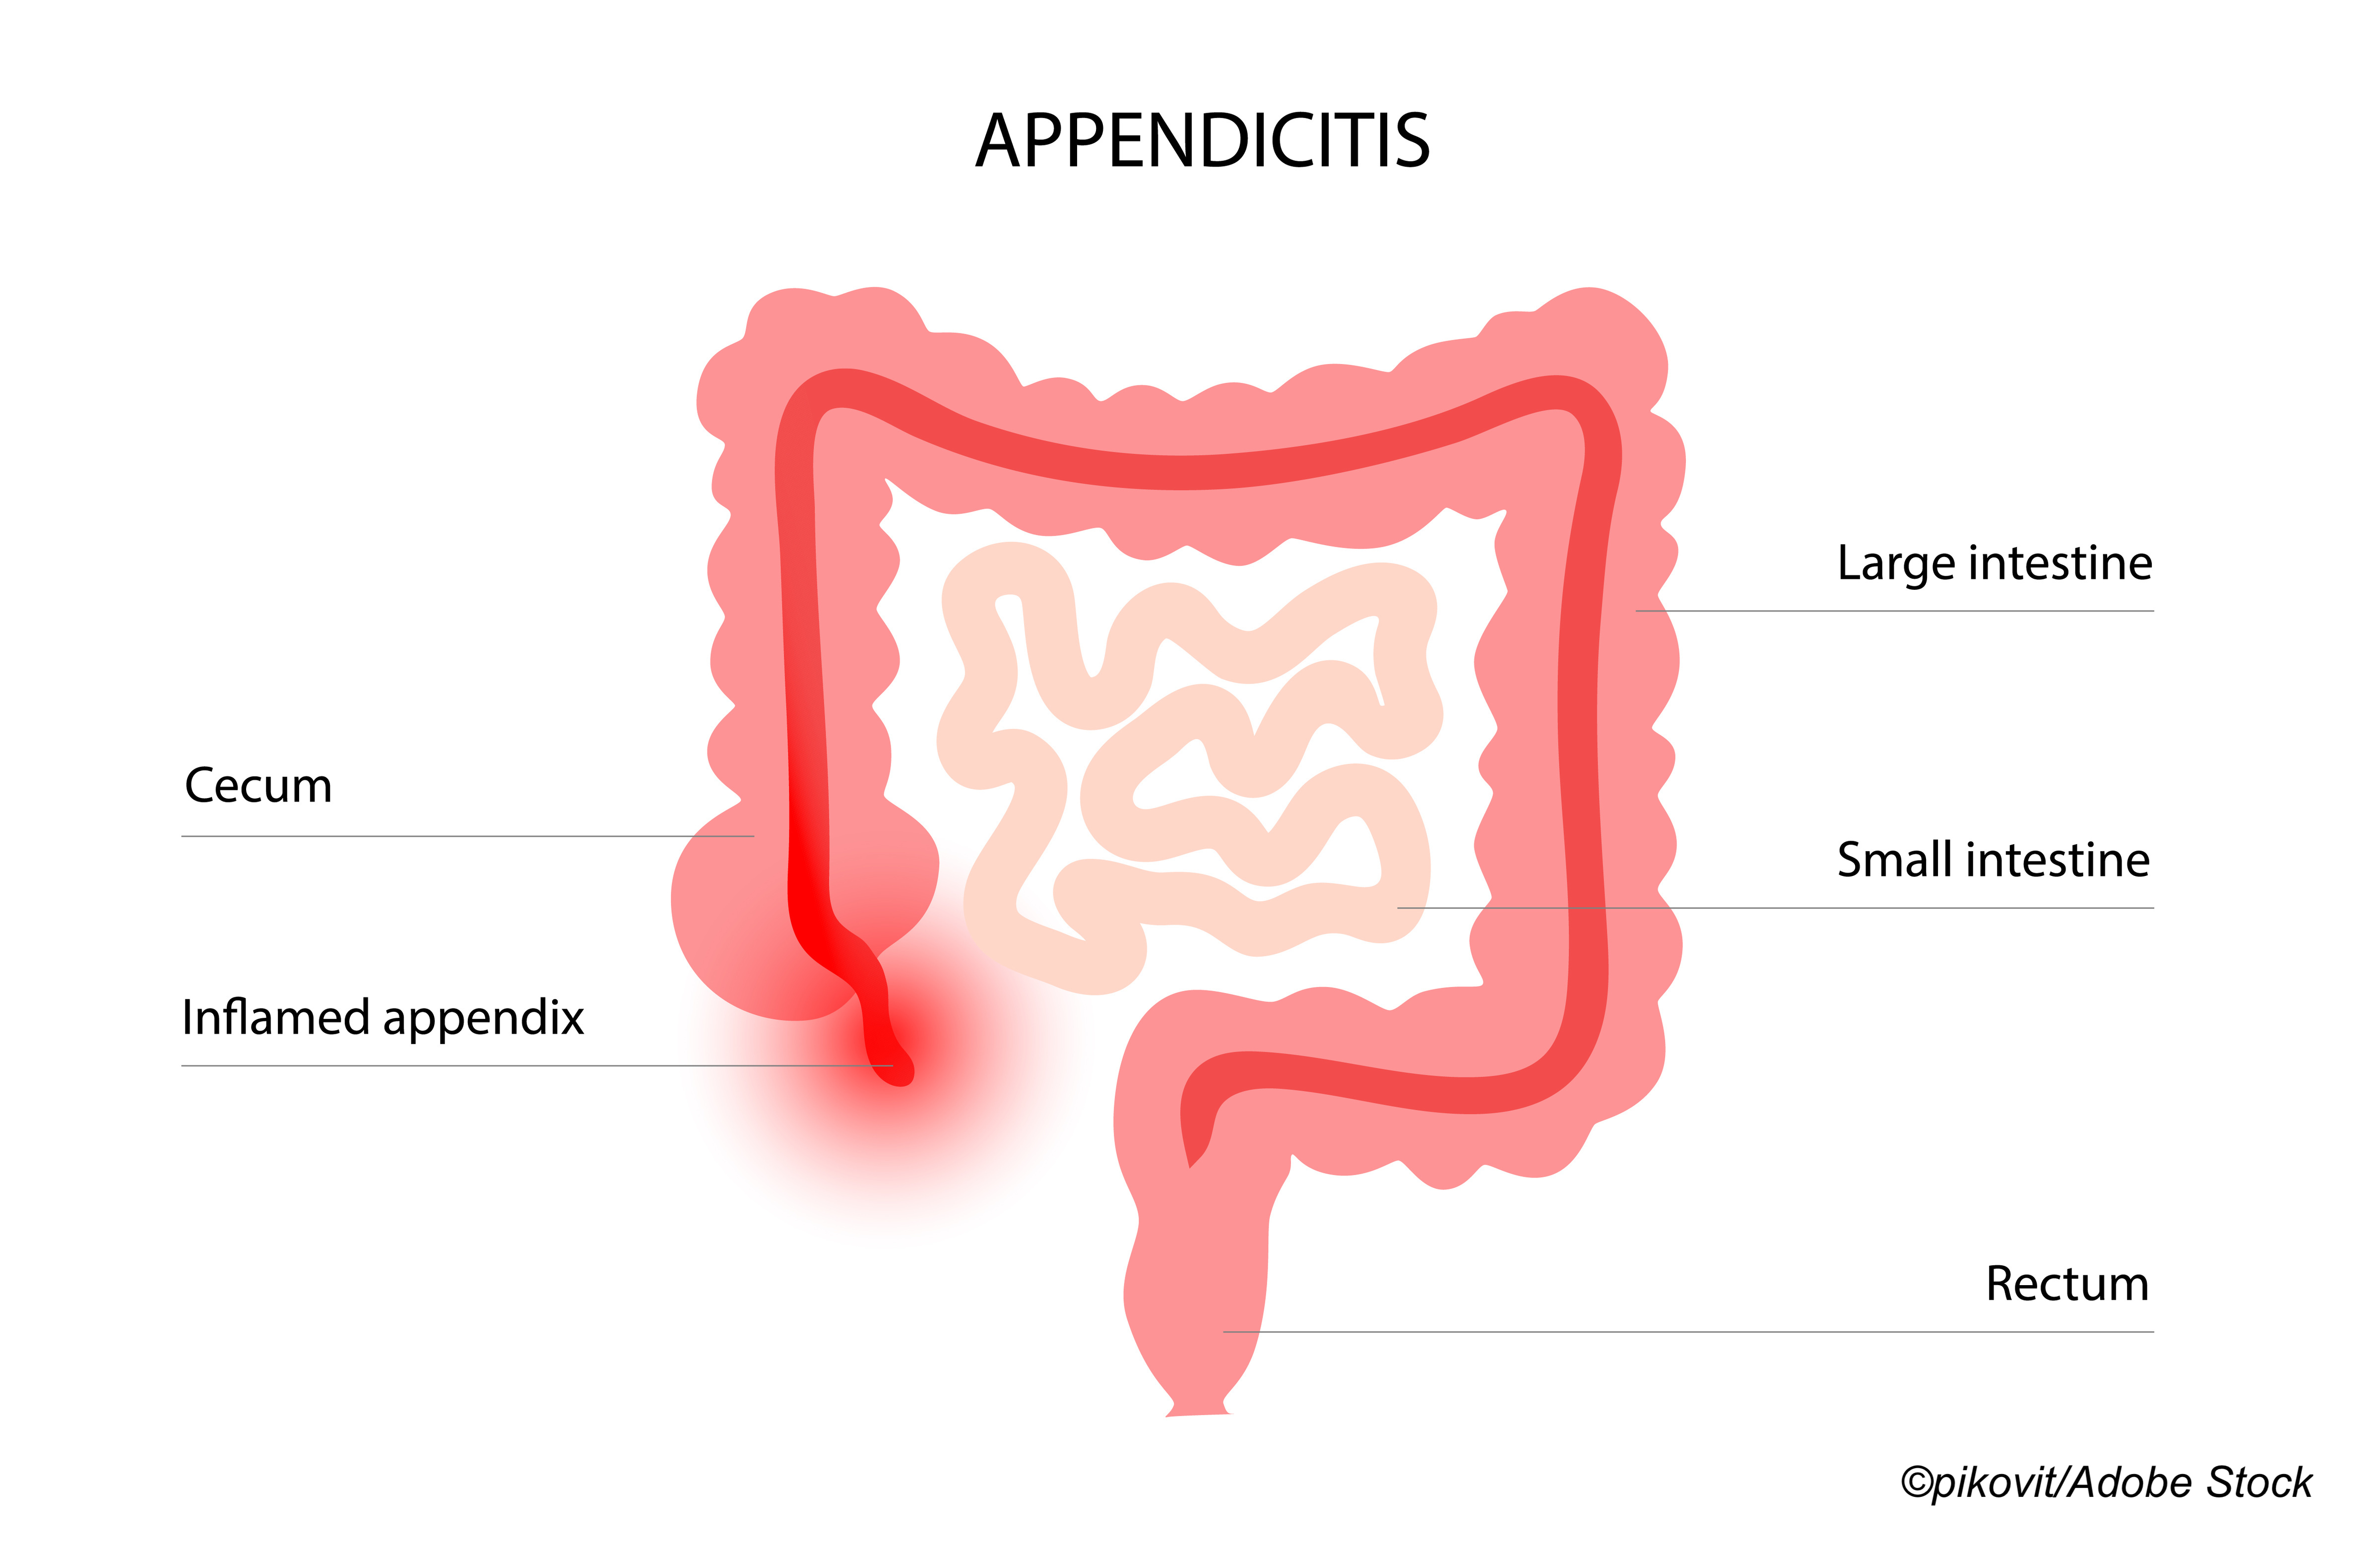 Acute Appendicitis: Looking at Treatment Options Beyond Surgery